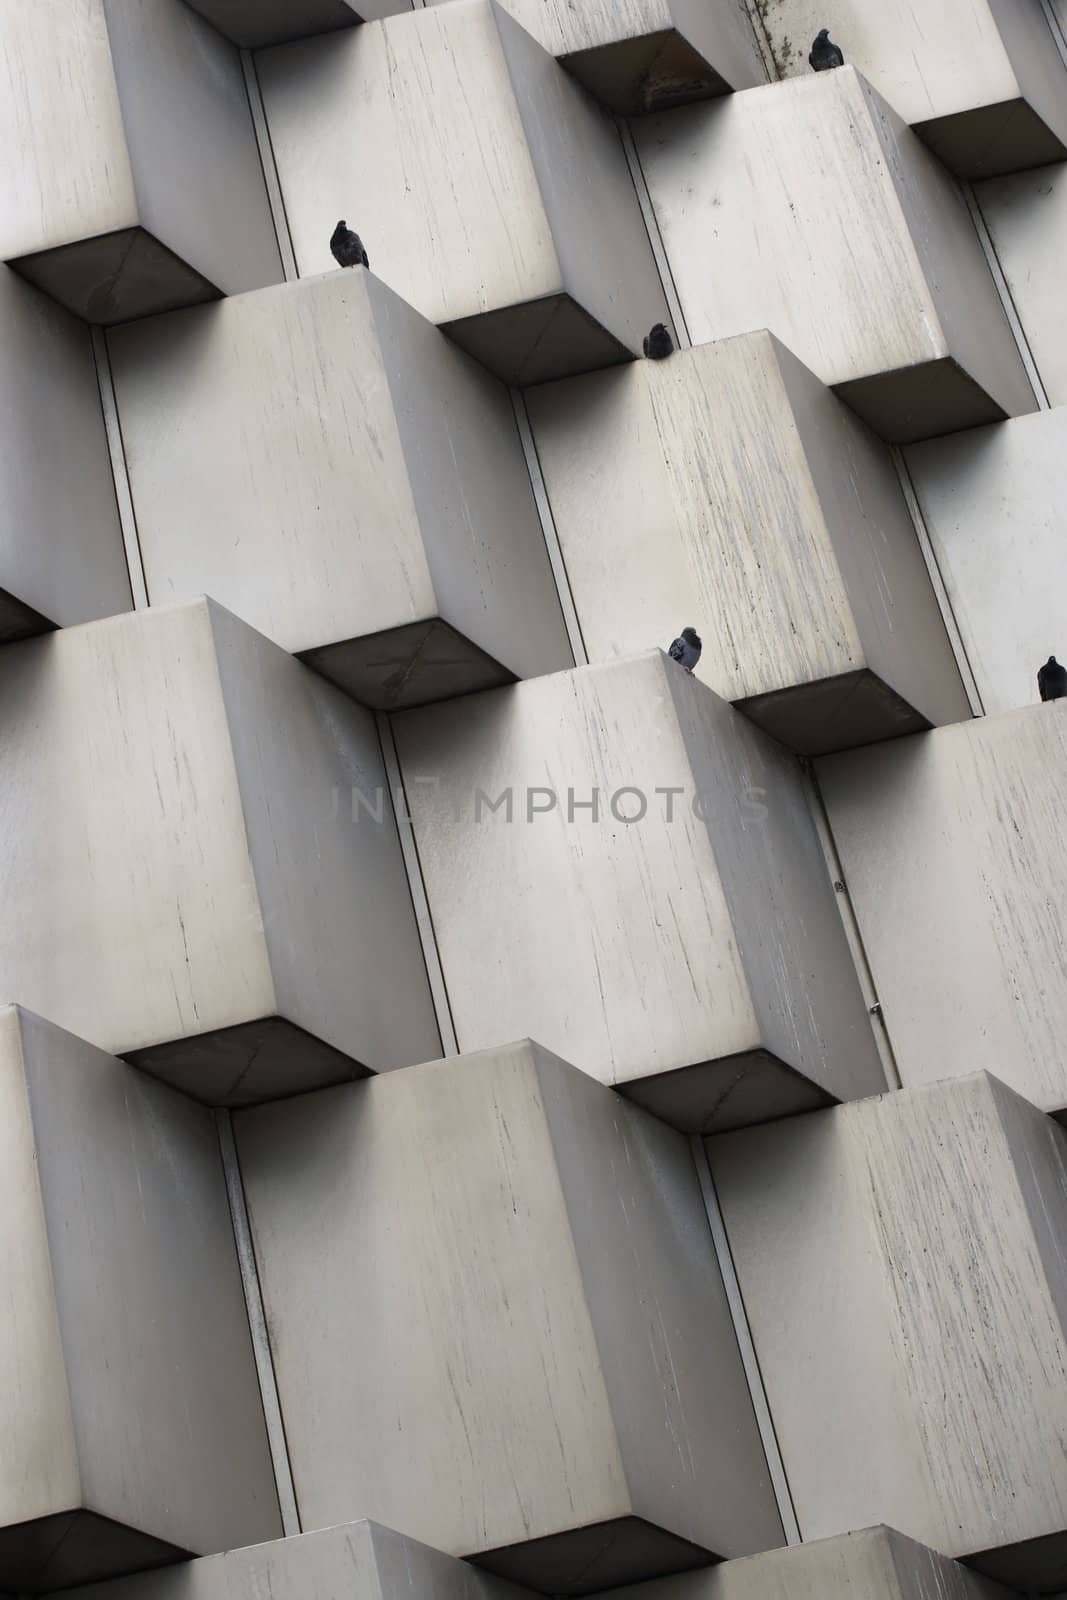 Abstract photo of a building facade with pigeons perched on top of the cubes.